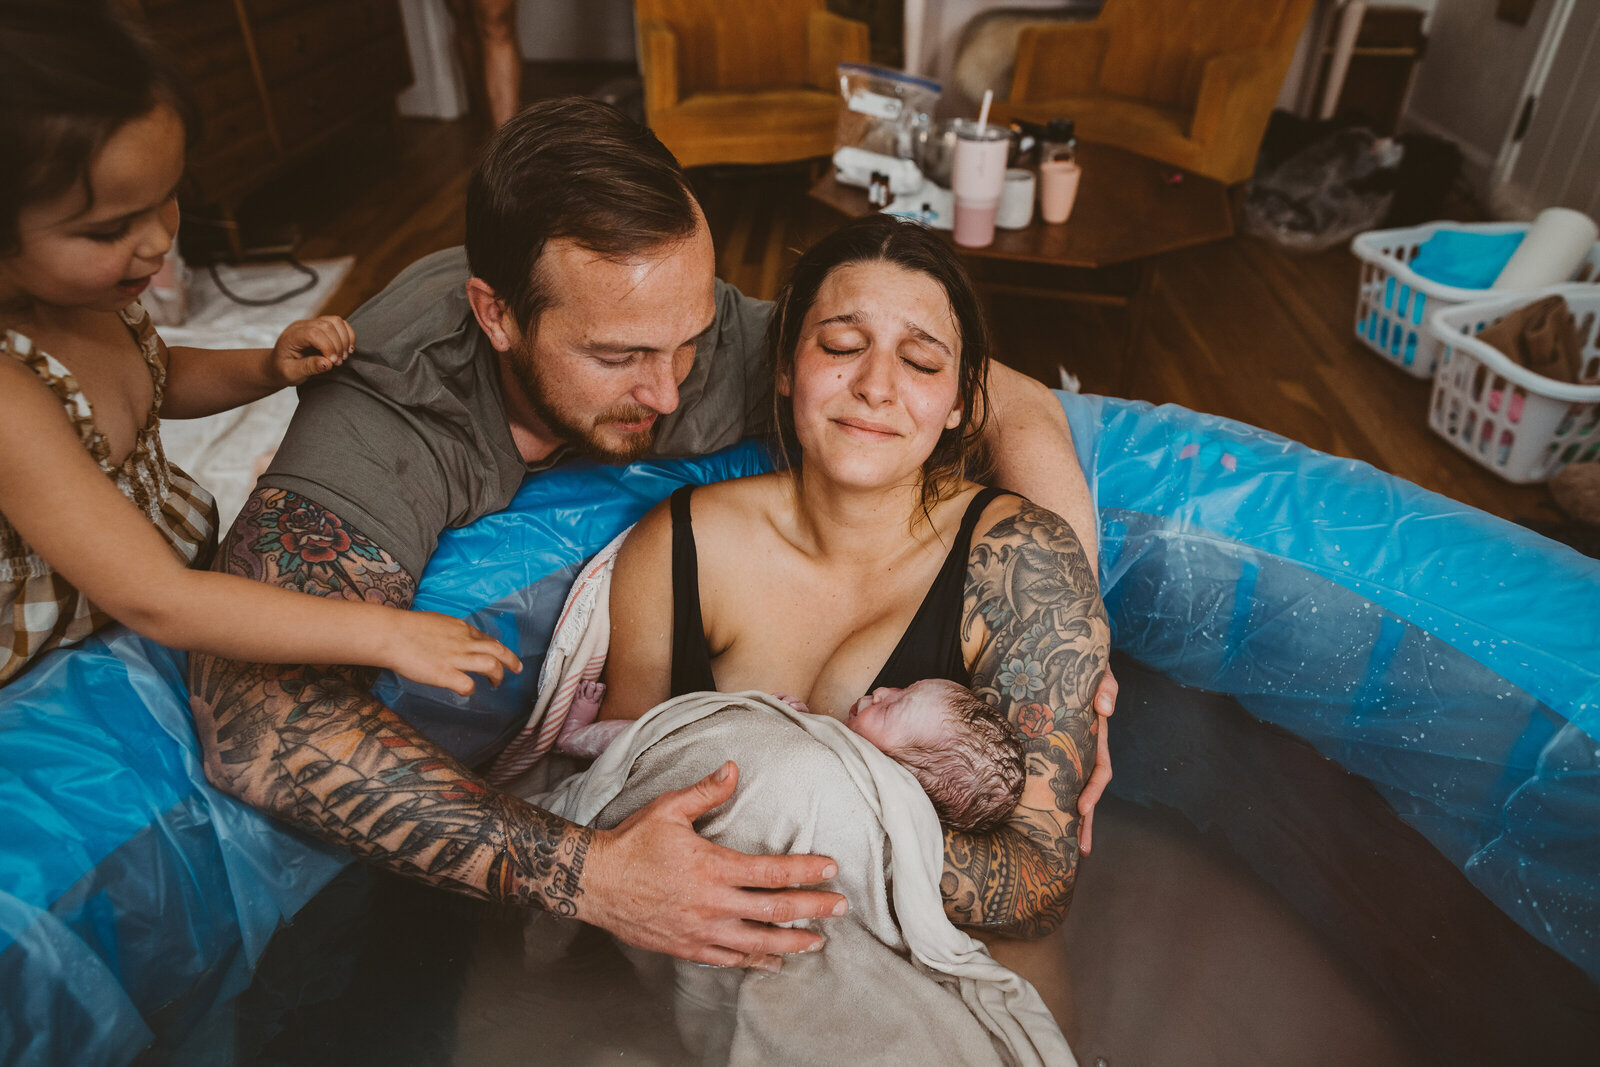 mom emotionally holding her new baby as dad and big sister reach for the baby too